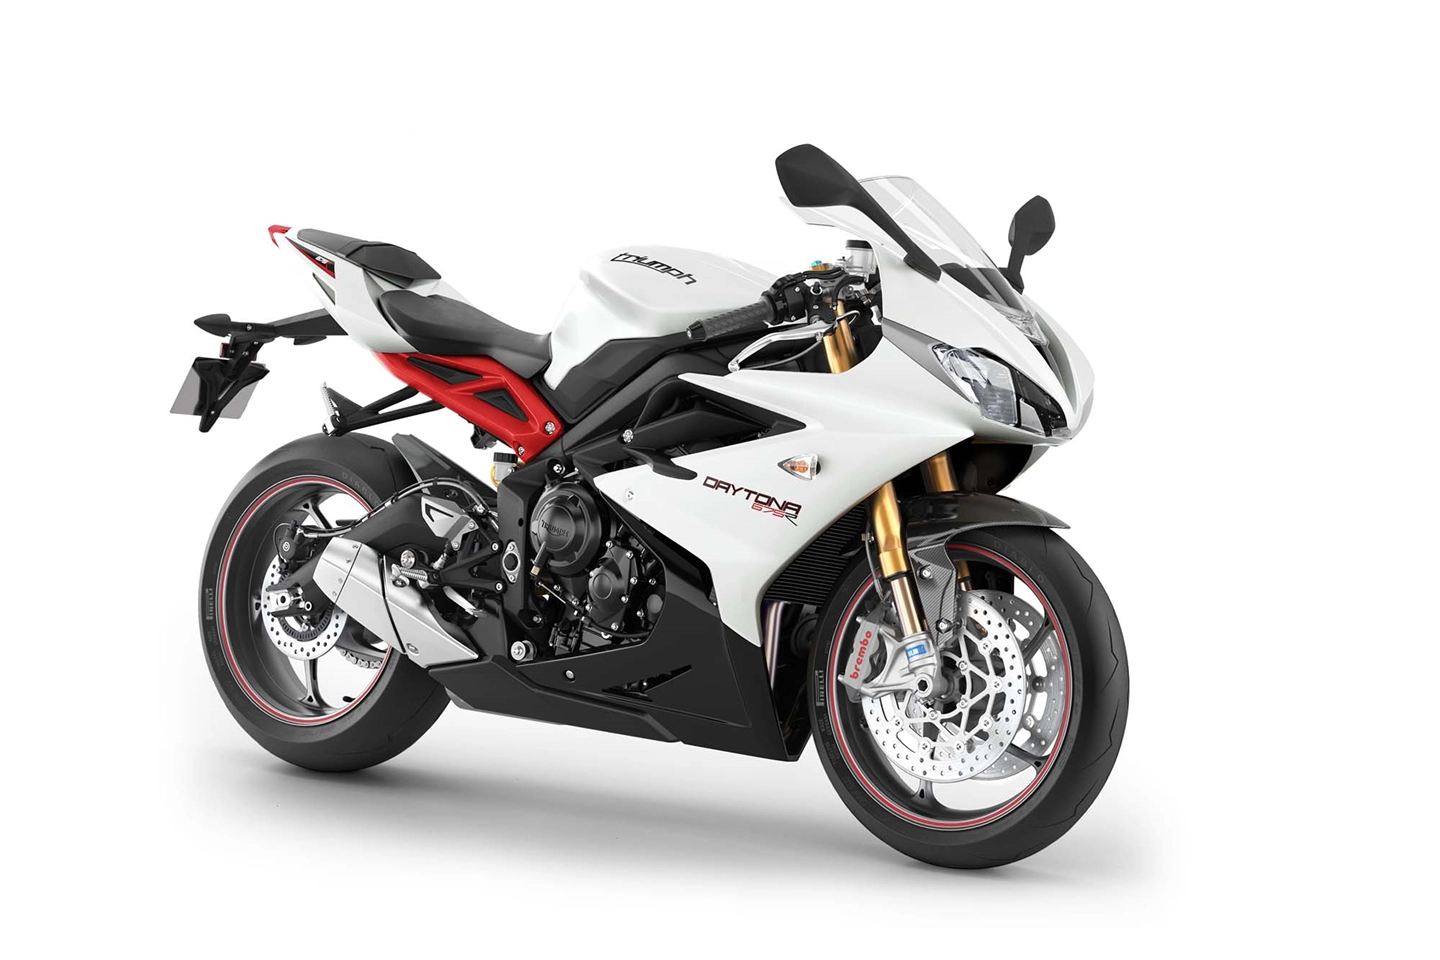 Is it worth it to Install Fairings on a Triumph Daytona 675R? – Aftermarket Fairings, Accessories and Motorcycle Repair Parts